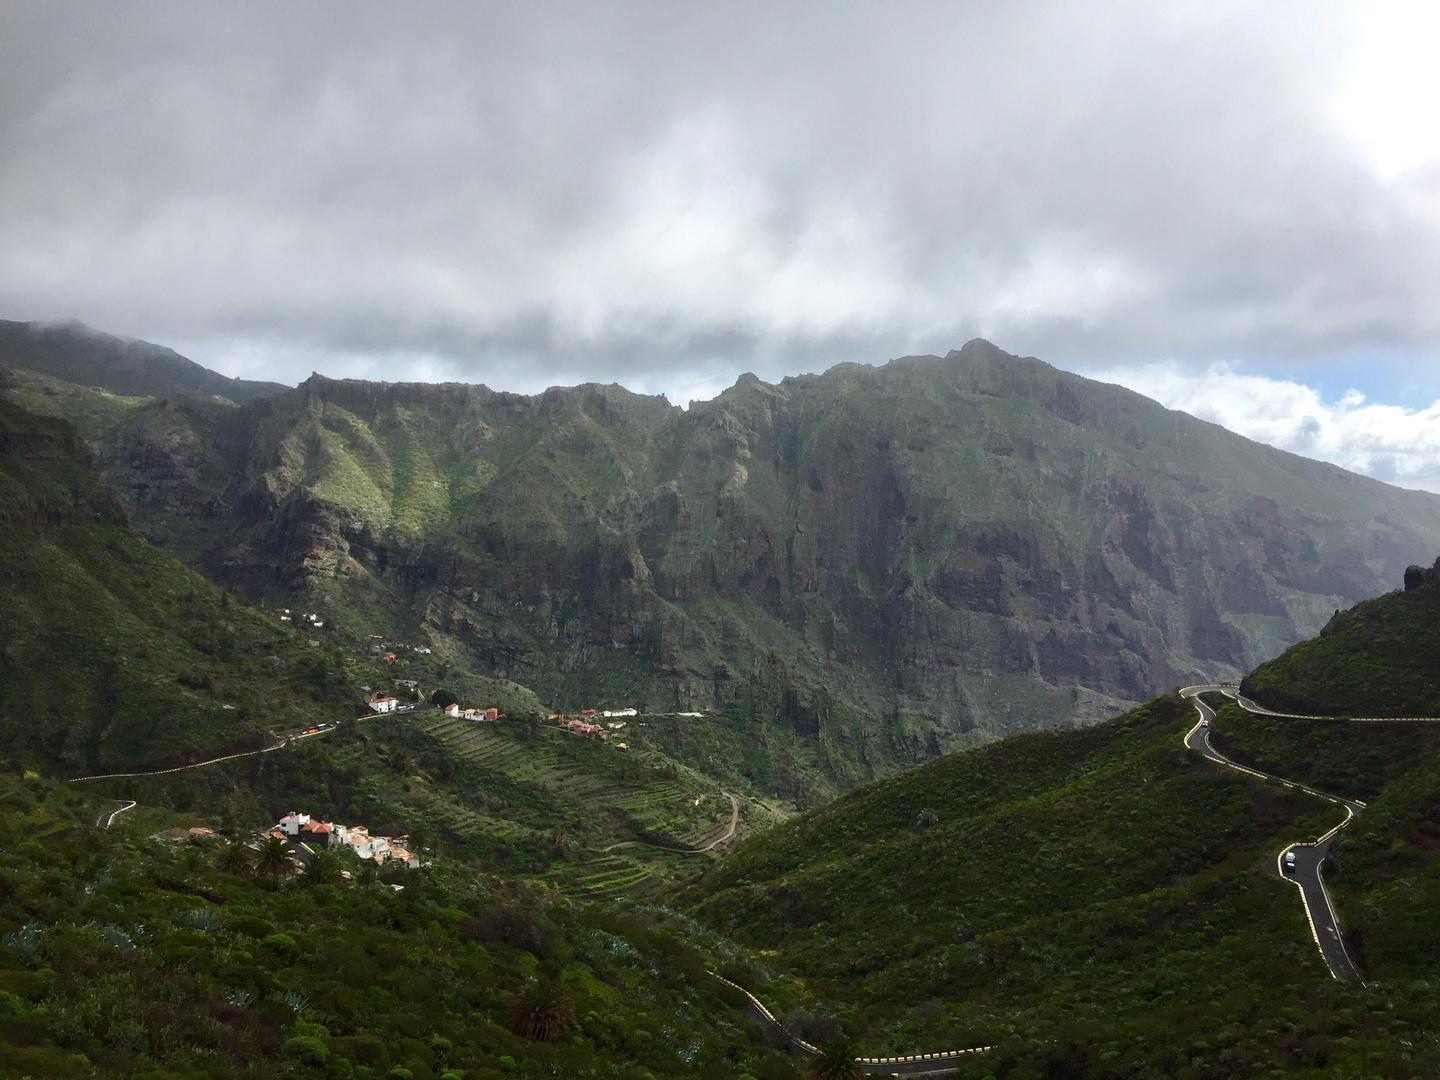 View of the Masca Valley in Tenerife, featuring winding roads that snake through lush green mountains under a cloudy sky.